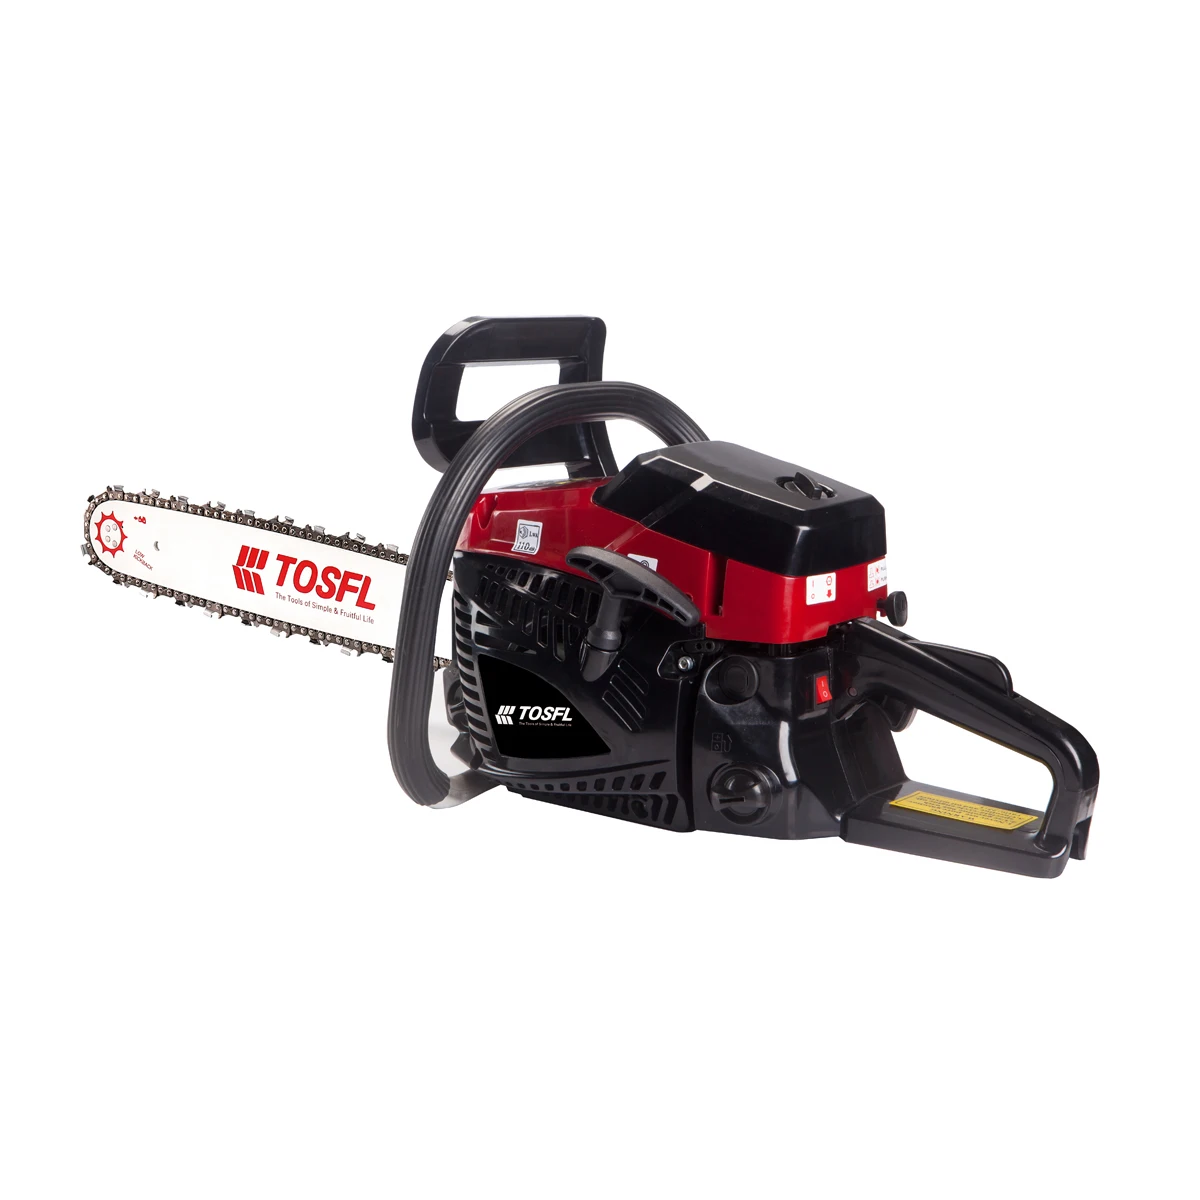 New Design March Expo Long life gasoline 60CC Big Power China chainsaws long reach strong power 16 inch battery tool cordless lithium chain saw wood cutting machine garden electric power chainsaws